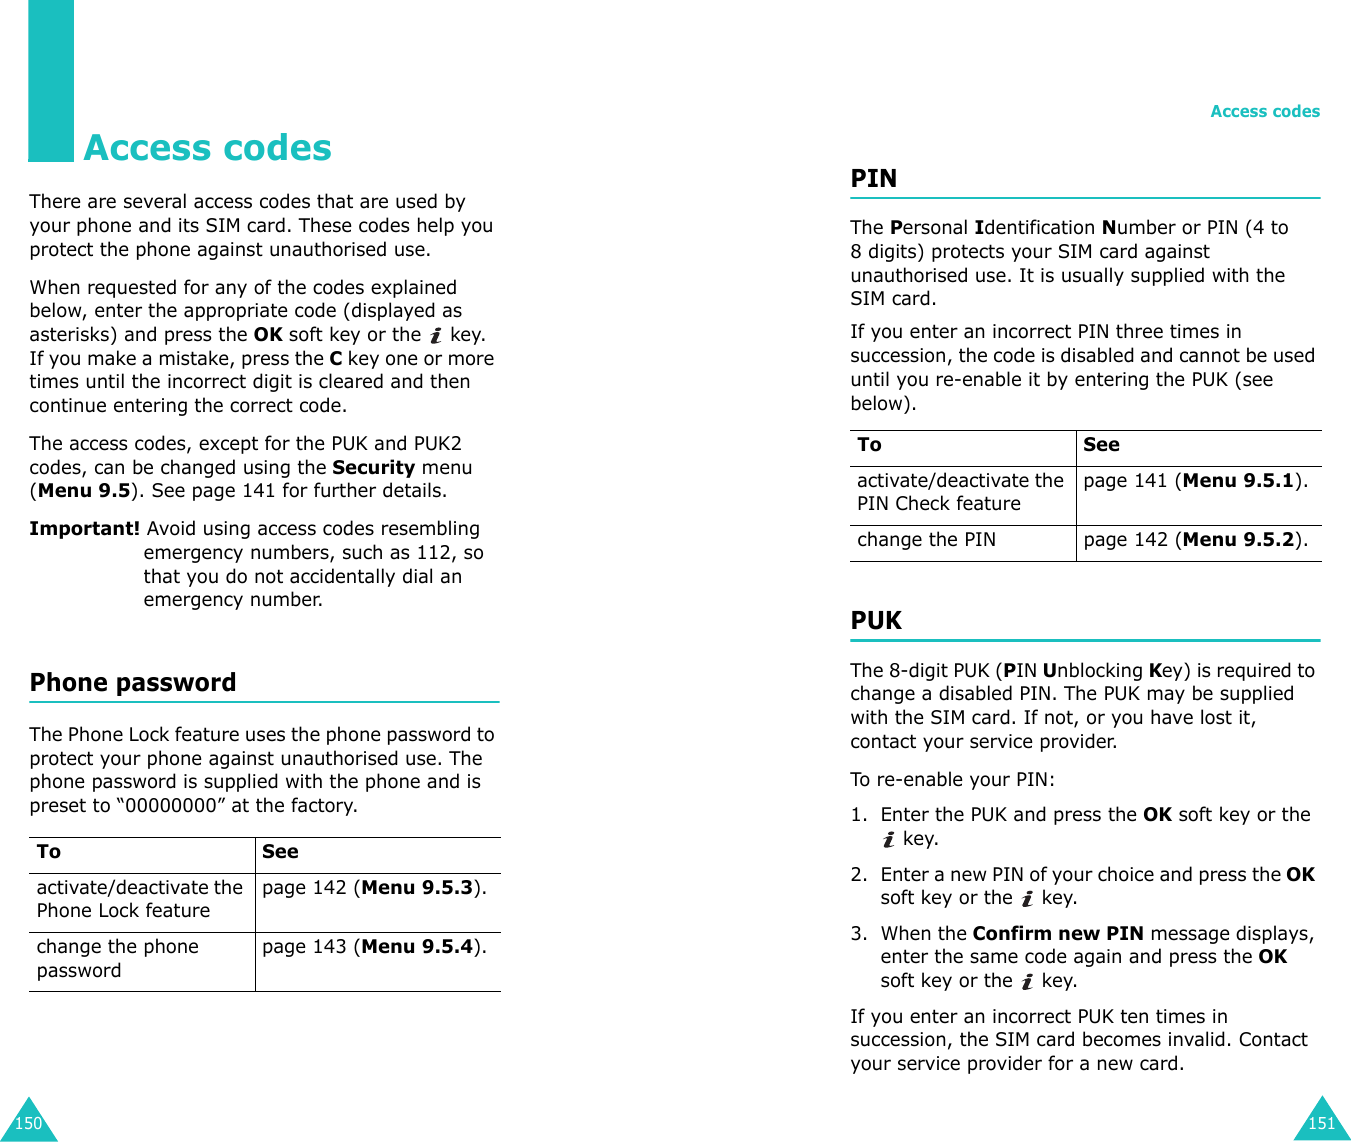 150Access codesThere are several access codes that are used by your phone and its SIM card. These codes help you protect the phone against unauthorised use.When requested for any of the codes explained below, enter the appropriate code (displayed as asterisks) and press the OK soft key or the   key. If you make a mistake, press the C key one or more times until the incorrect digit is cleared and then continue entering the correct code.The access codes, except for the PUK and PUK2 codes, can be changed using the Security menu (Menu 9.5). See page 141 for further details.Important! Avoid using access codes resembling emergency numbers, such as 112, so that you do not accidentally dial an emergency number.Phone passwordThe Phone Lock feature uses the phone password to protect your phone against unauthorised use. The phone password is supplied with the phone and is preset to “00000000” at the factory.To Seeactivate/deactivate the Phone Lock featurepage 142 (Menu 9.5.3).change the phone passwordpage 143 (Menu 9.5.4).Access codes151PINThe Personal Identification Number or PIN (4 to 8 digits) protects your SIM card against unauthorised use. It is usually supplied with the SIM card.If you enter an incorrect PIN three times in succession, the code is disabled and cannot be used until you re-enable it by entering the PUK (see below).PUKThe 8-digit PUK (PIN Unblocking Key) is required to change a disabled PIN. The PUK may be supplied with the SIM card. If not, or you have lost it, contact your service provider.To re-enable your PIN:1. Enter the PUK and press the OK soft key or the  key.2. Enter a new PIN of your choice and press the OK soft key or the   key.3. When the Confirm new PIN message displays, enter the same code again and press the OK soft key or the   key.If you enter an incorrect PUK ten times in succession, the SIM card becomes invalid. Contact your service provider for a new card.To Seeactivate/deactivate the PIN Check featurepage 141 (Menu 9.5.1).change the PIN page 142 (Menu 9.5.2).